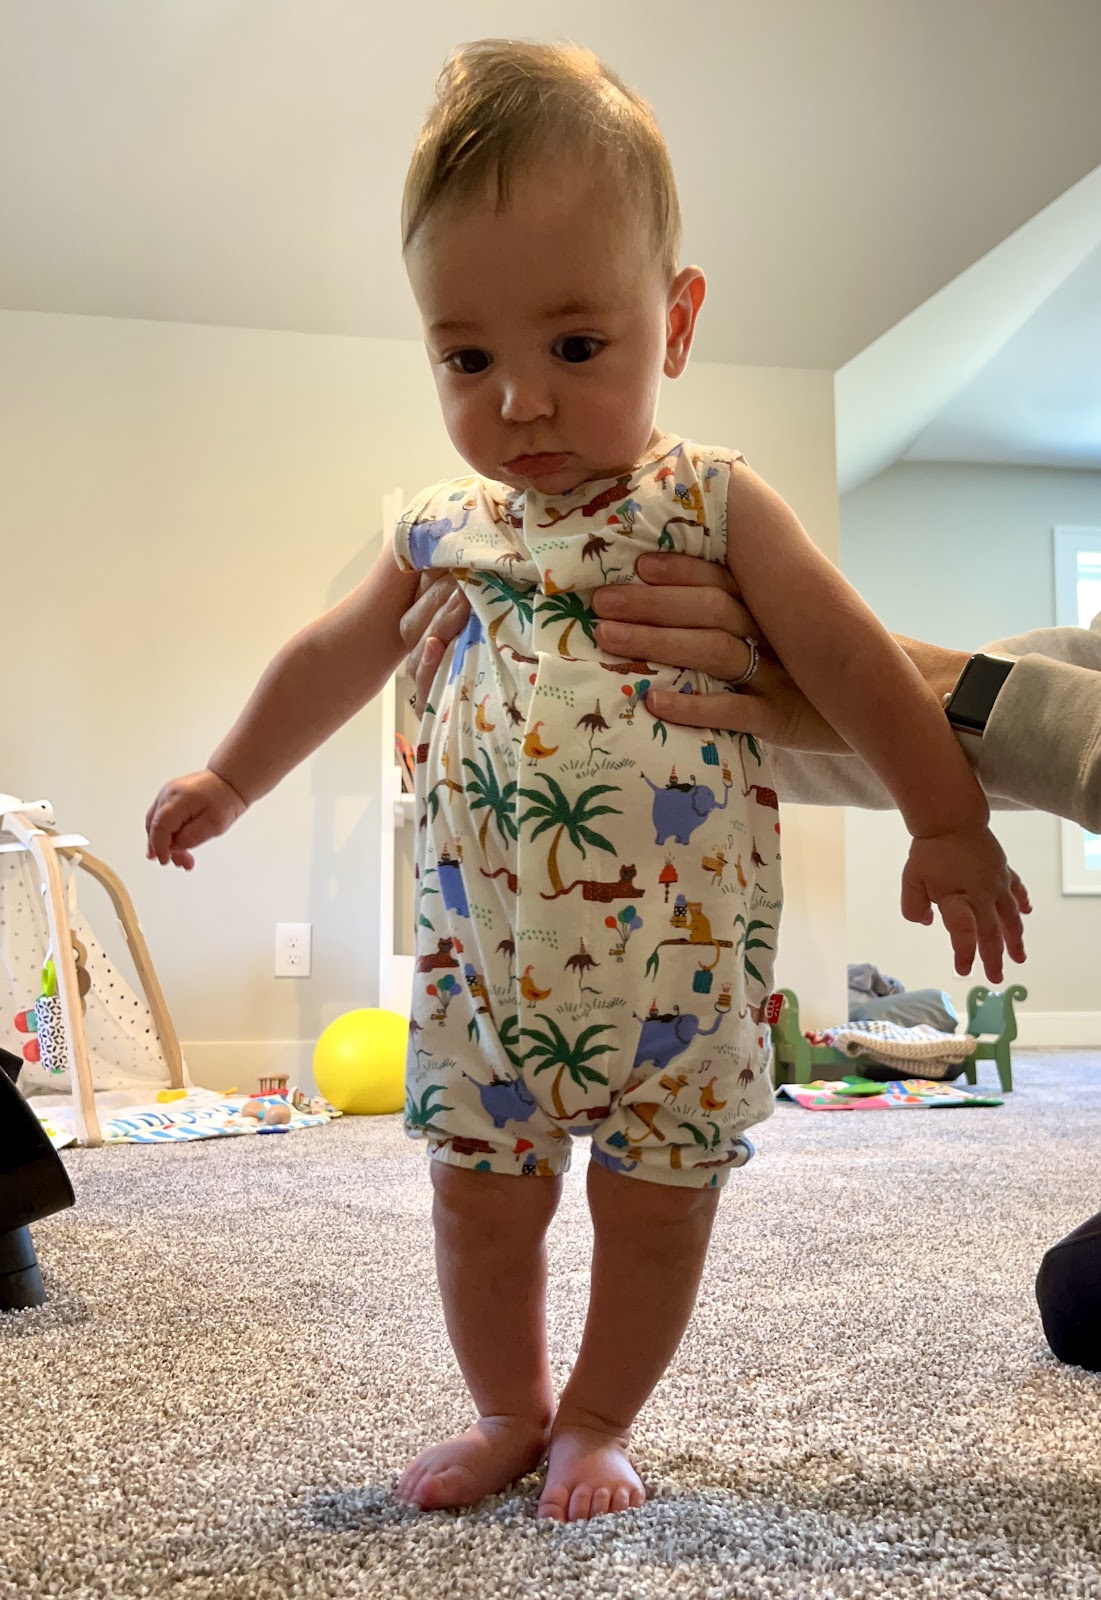 exercises and activities for five-month-old